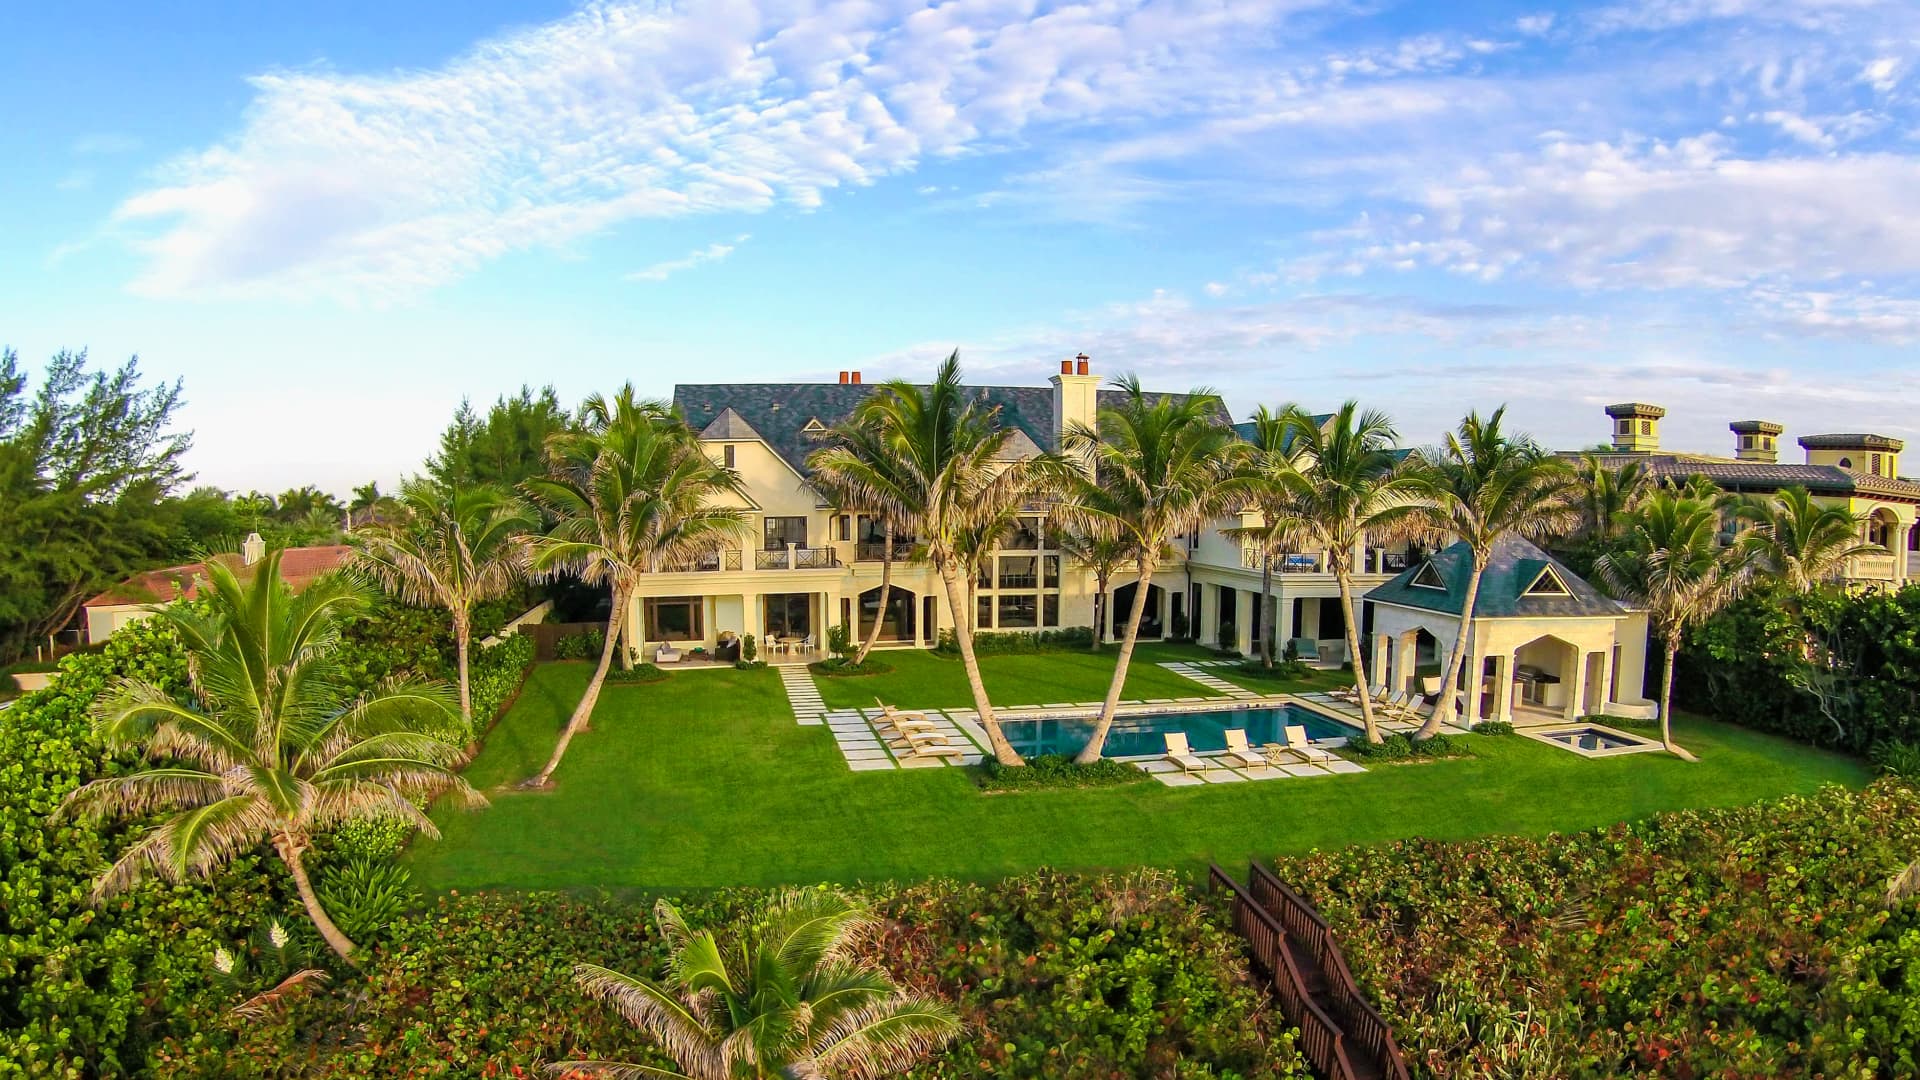 This oceanfront mansion in Highland Beach, FL sold for $40 million breaking a local record for the town.